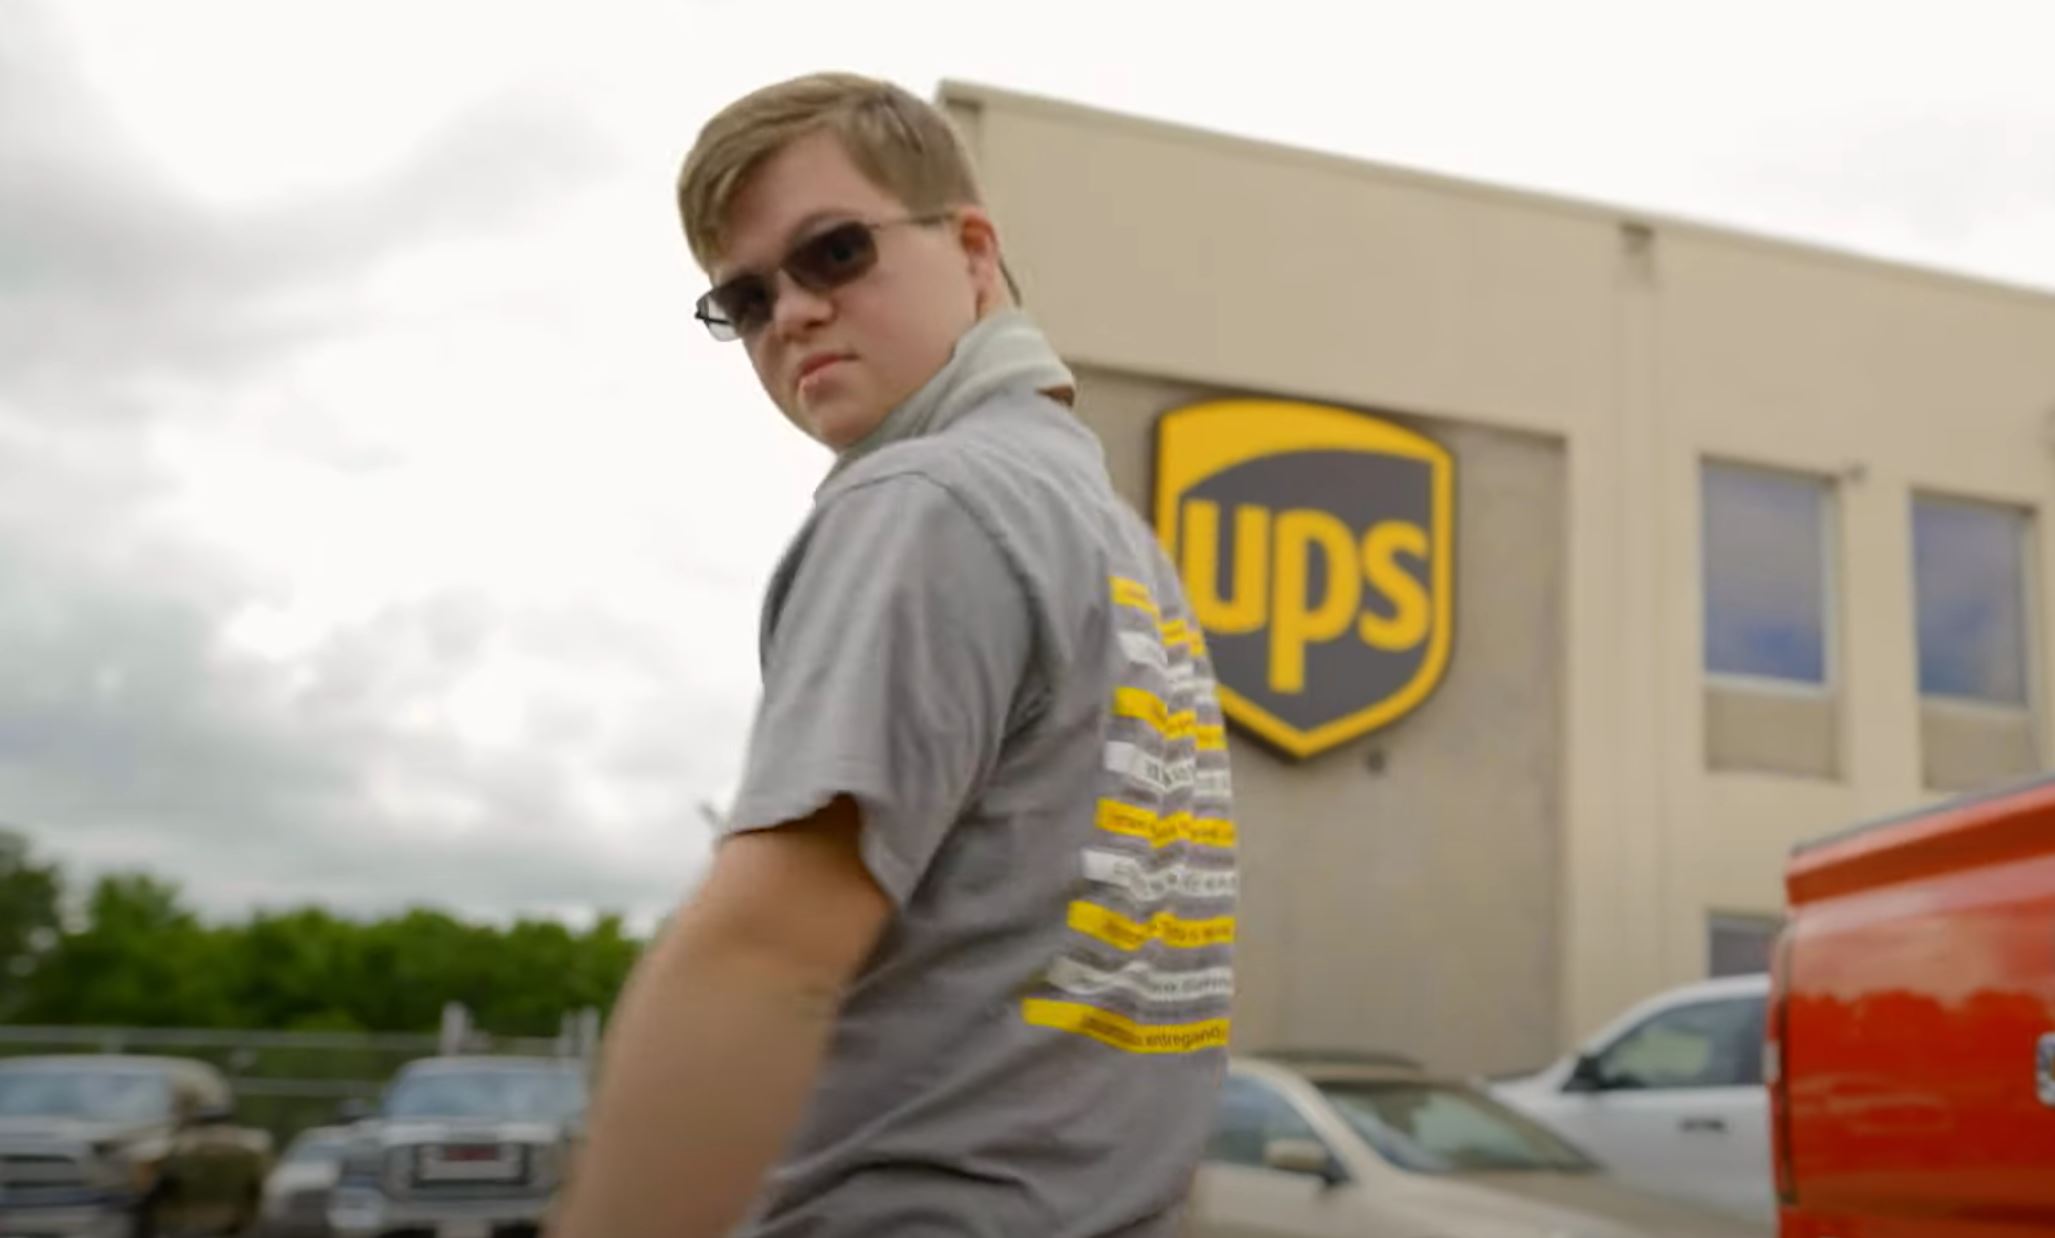 UPS hires Jefferson County man with Down Syndrome, features him in video